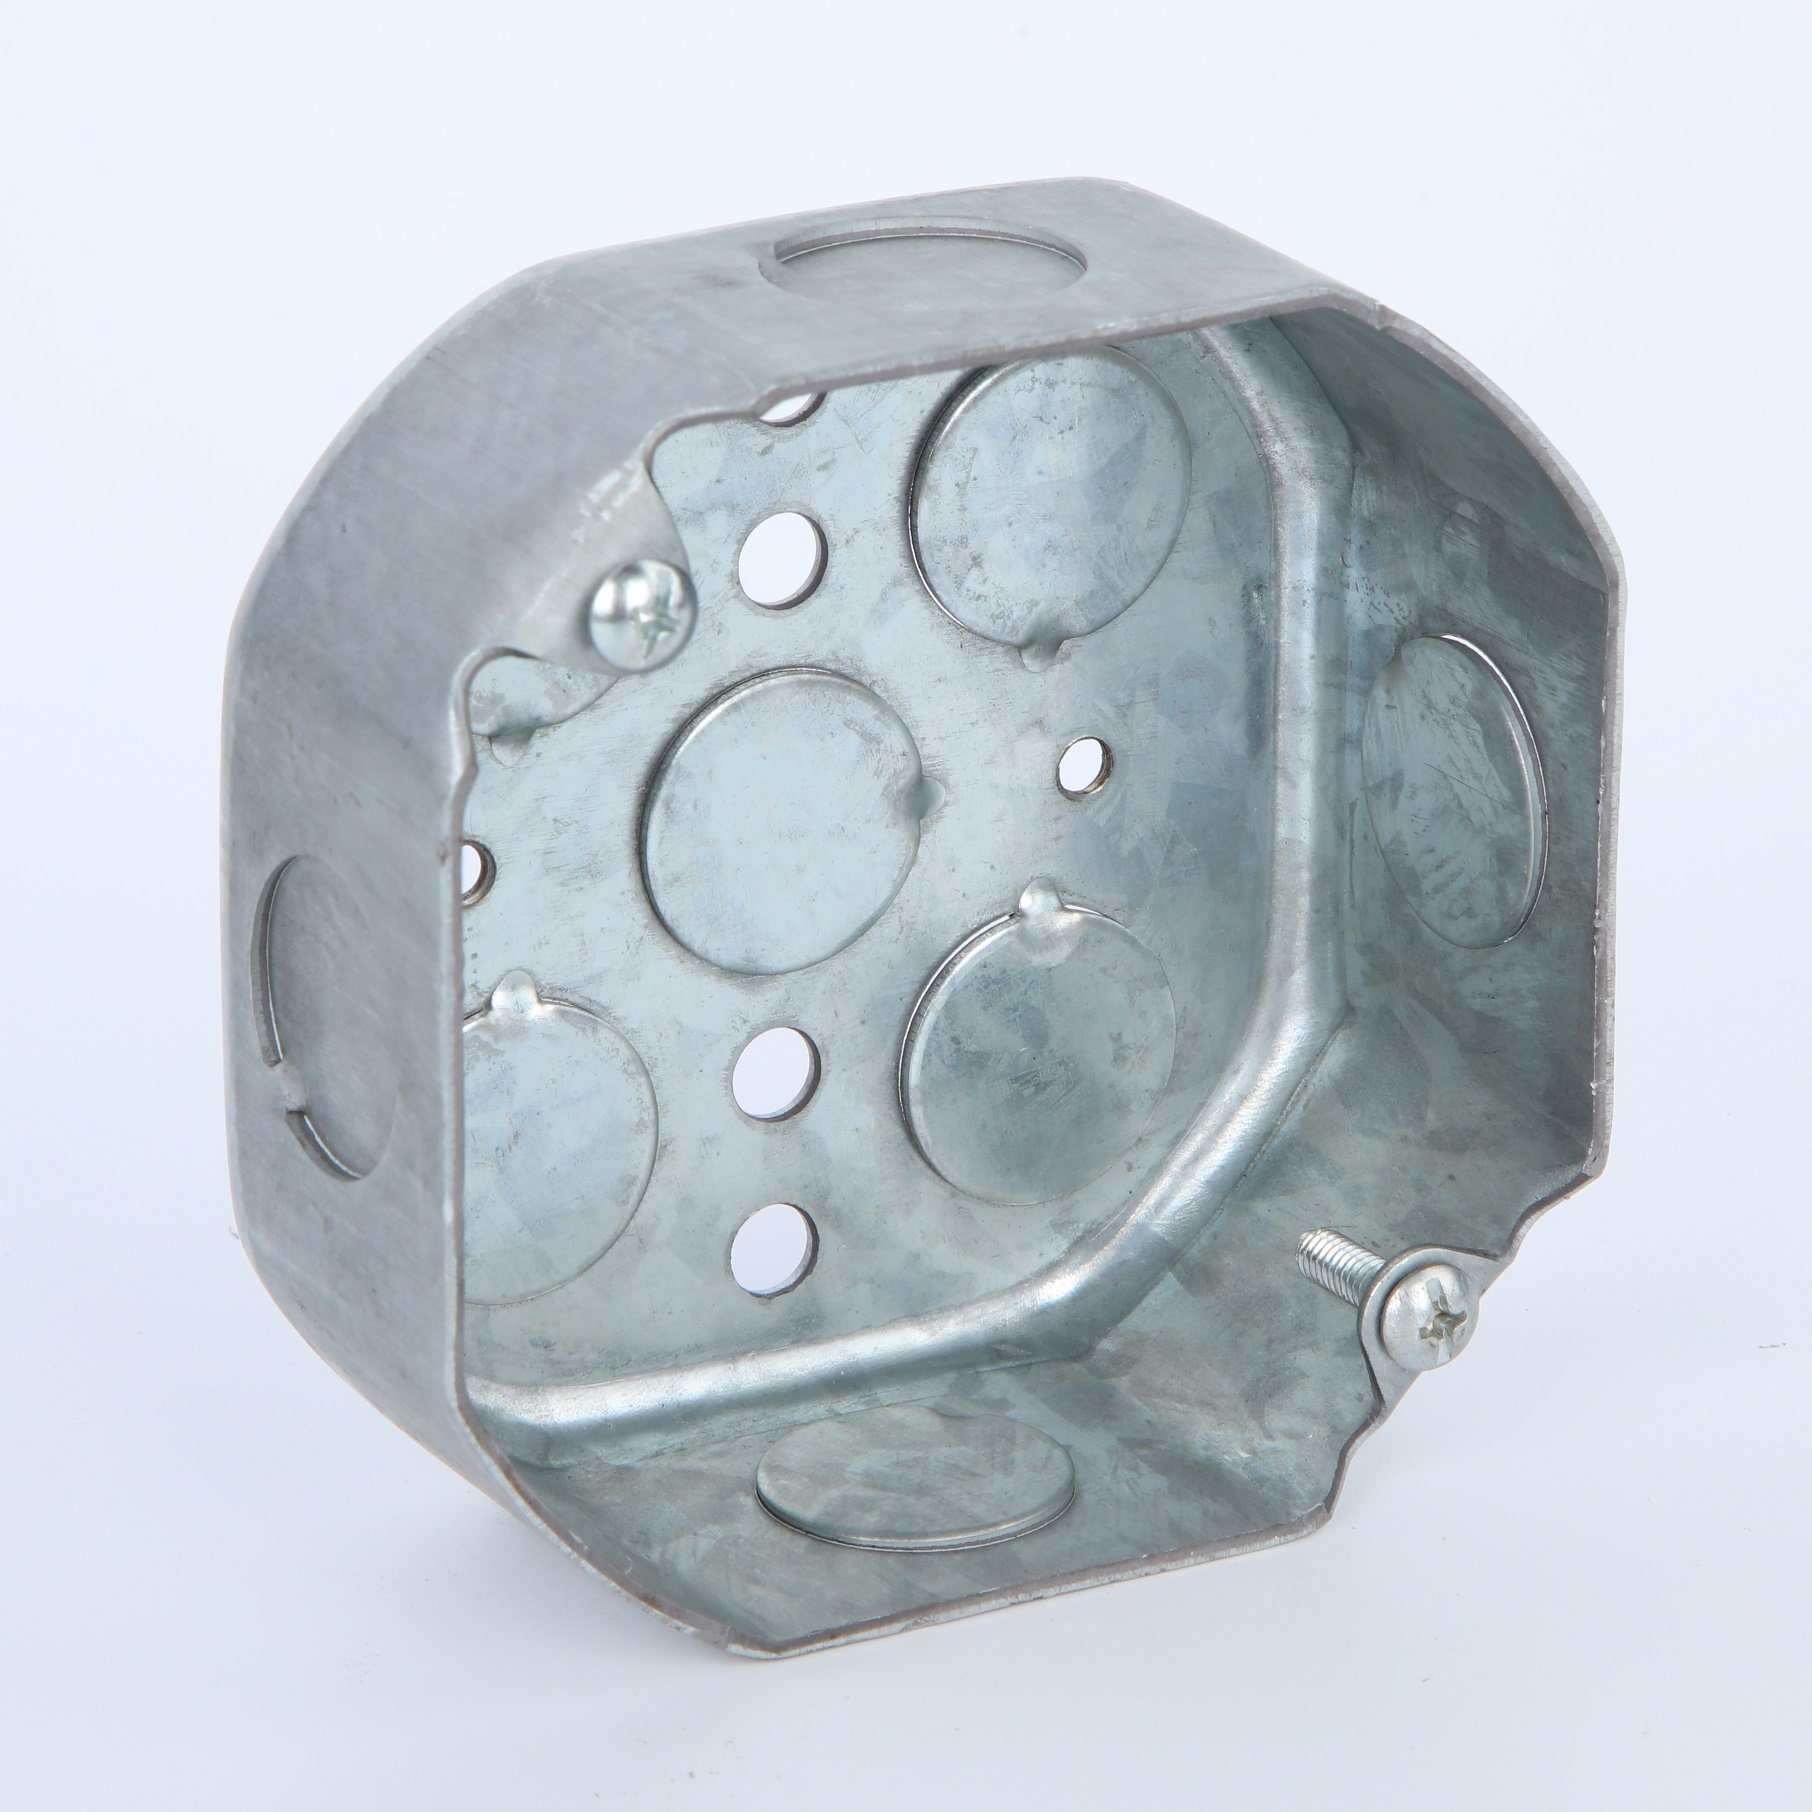 Octagon Steel Outlet Box 1.60mm Pregalvanized UL Listed